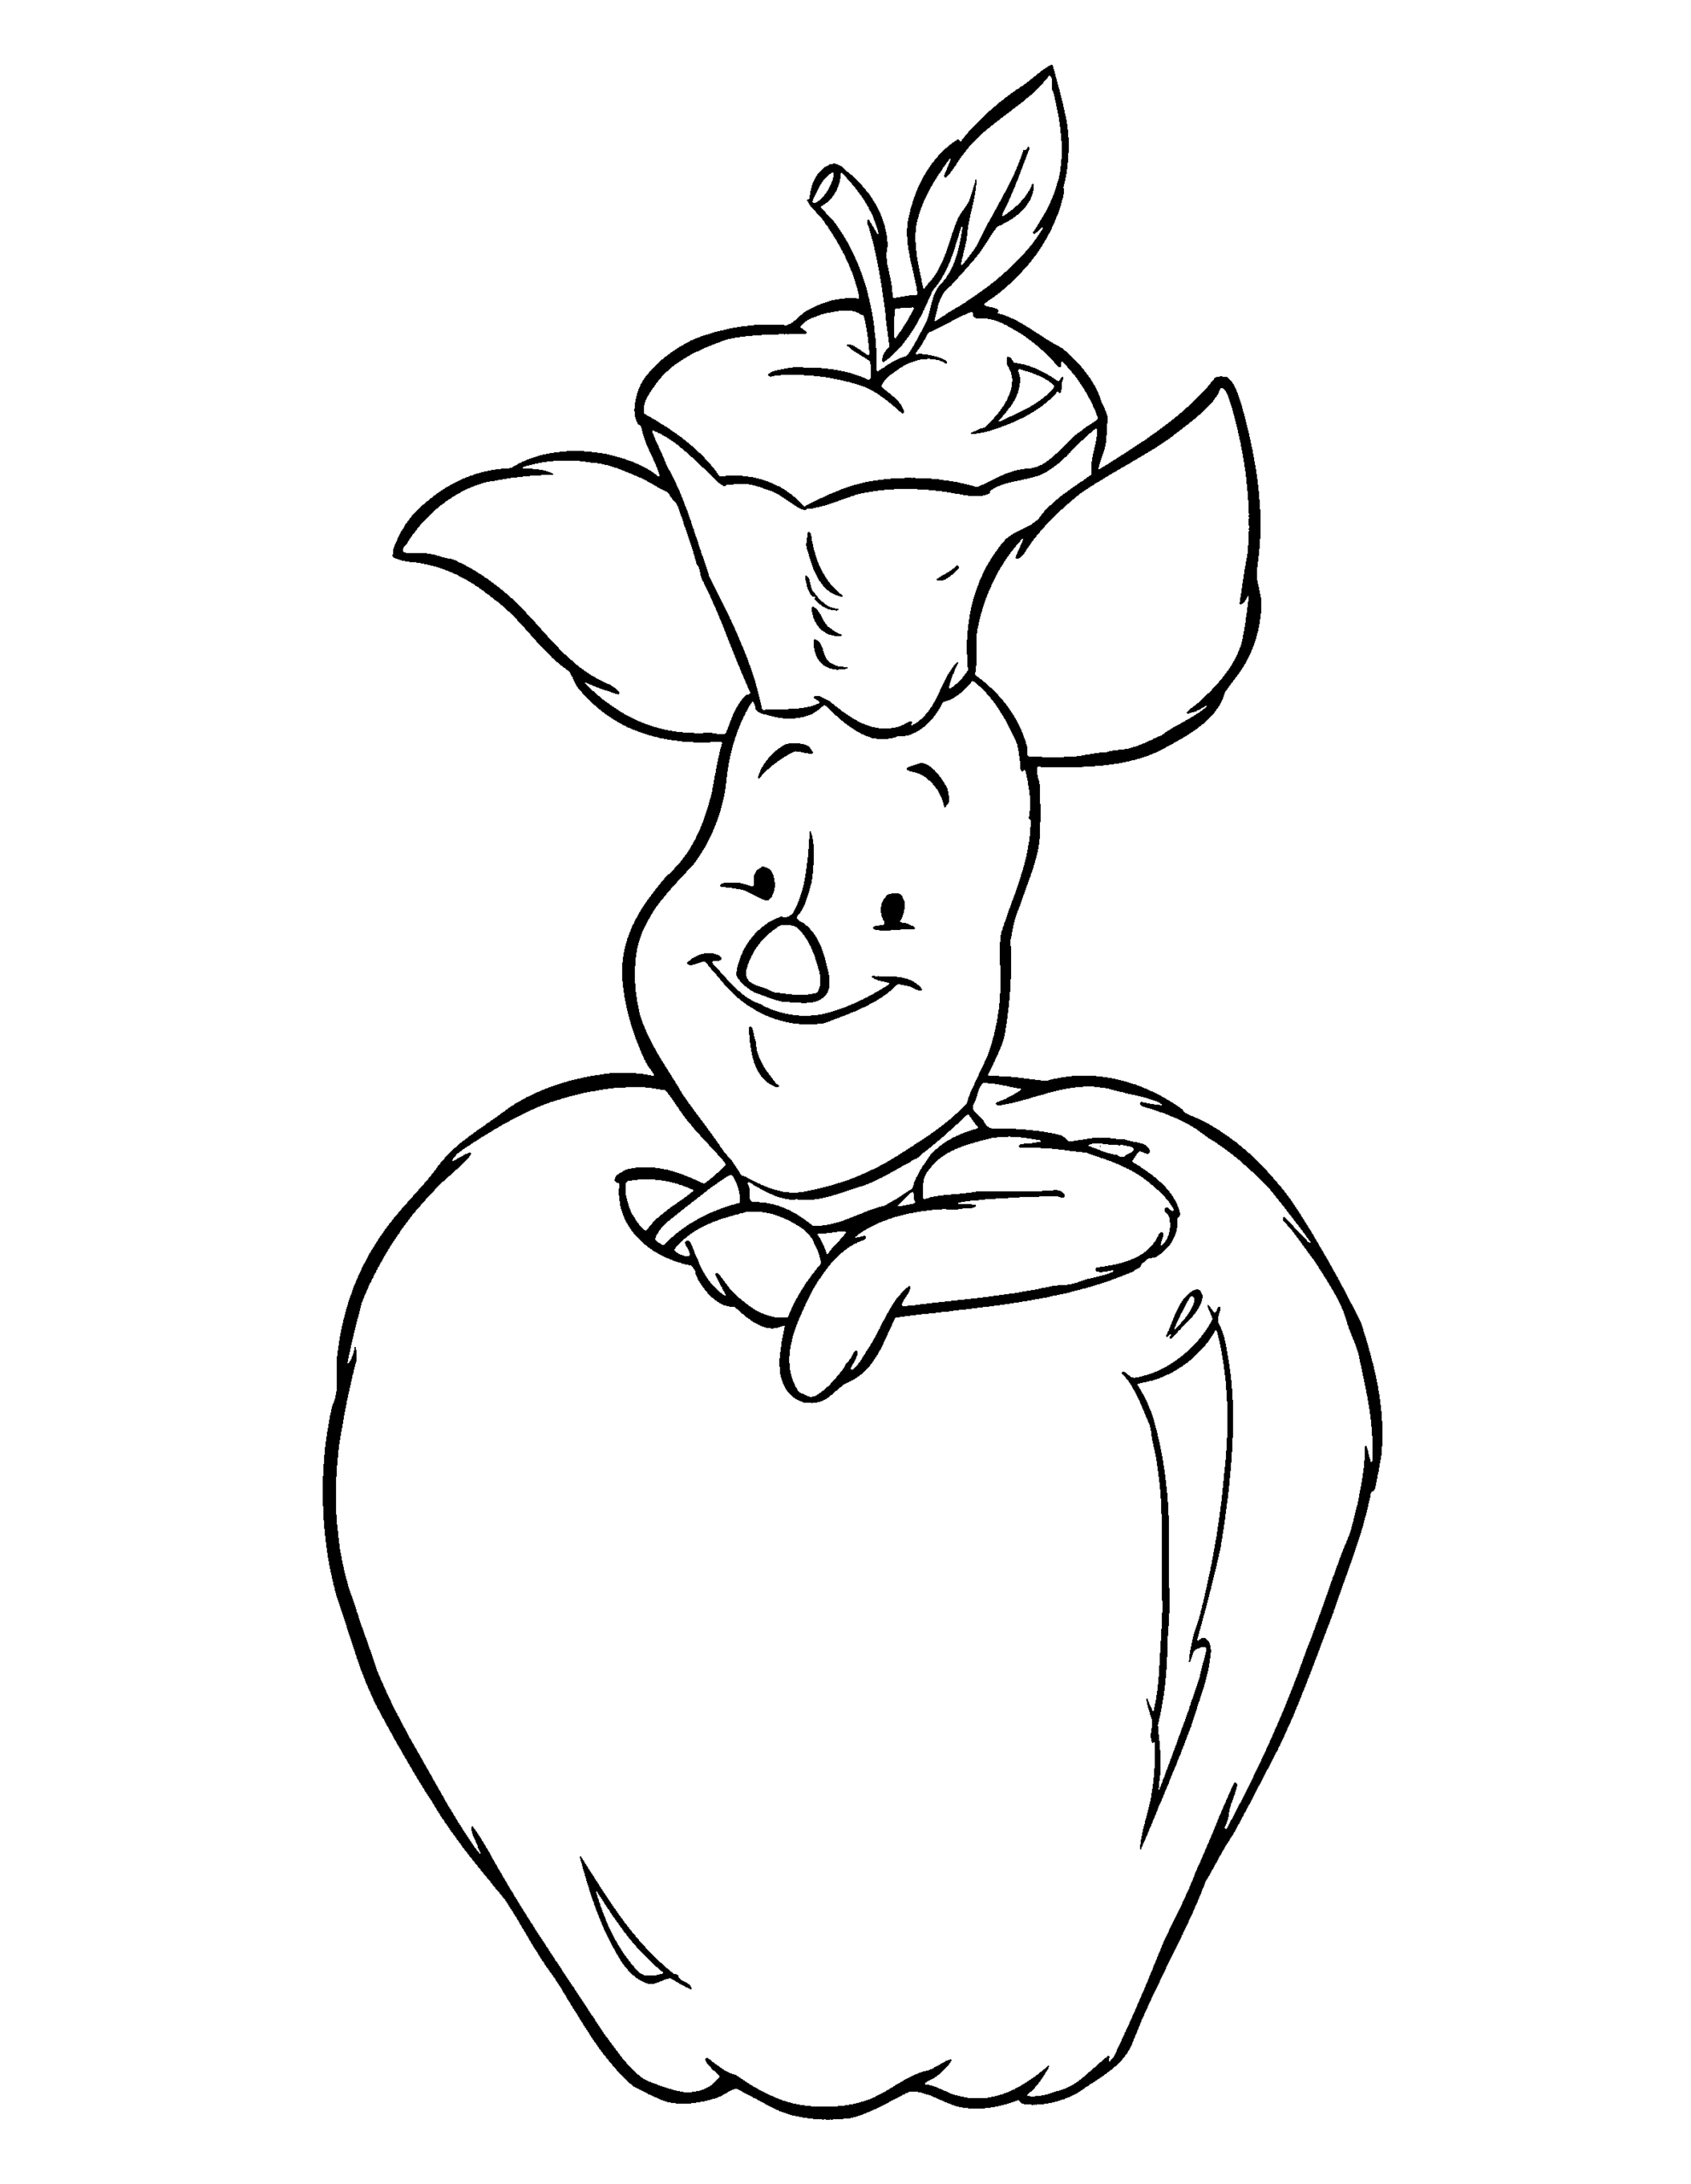 Winnie the Pooh Coloring Pages Cartoons winnie the pooh 36 Printable 2020 7142 Coloring4free